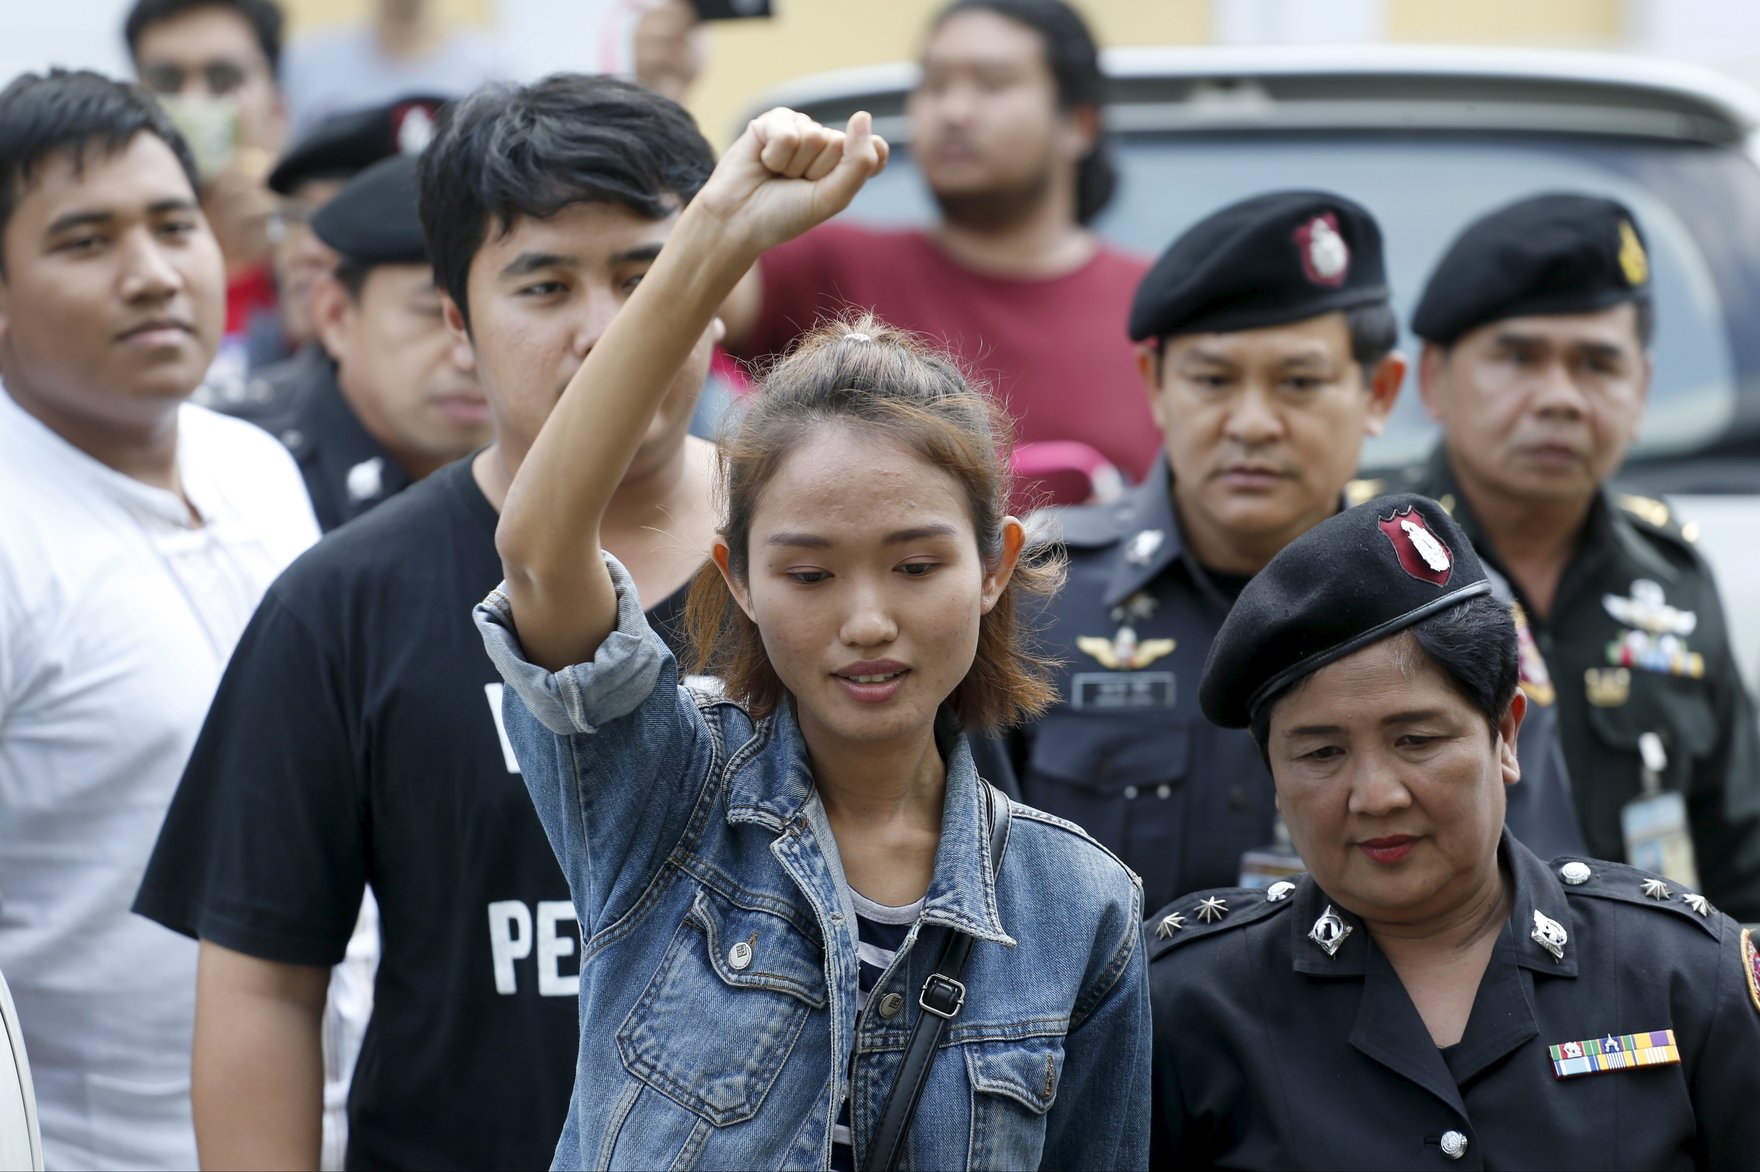 MP in Thailand Gets 2-Year Prison Sentence